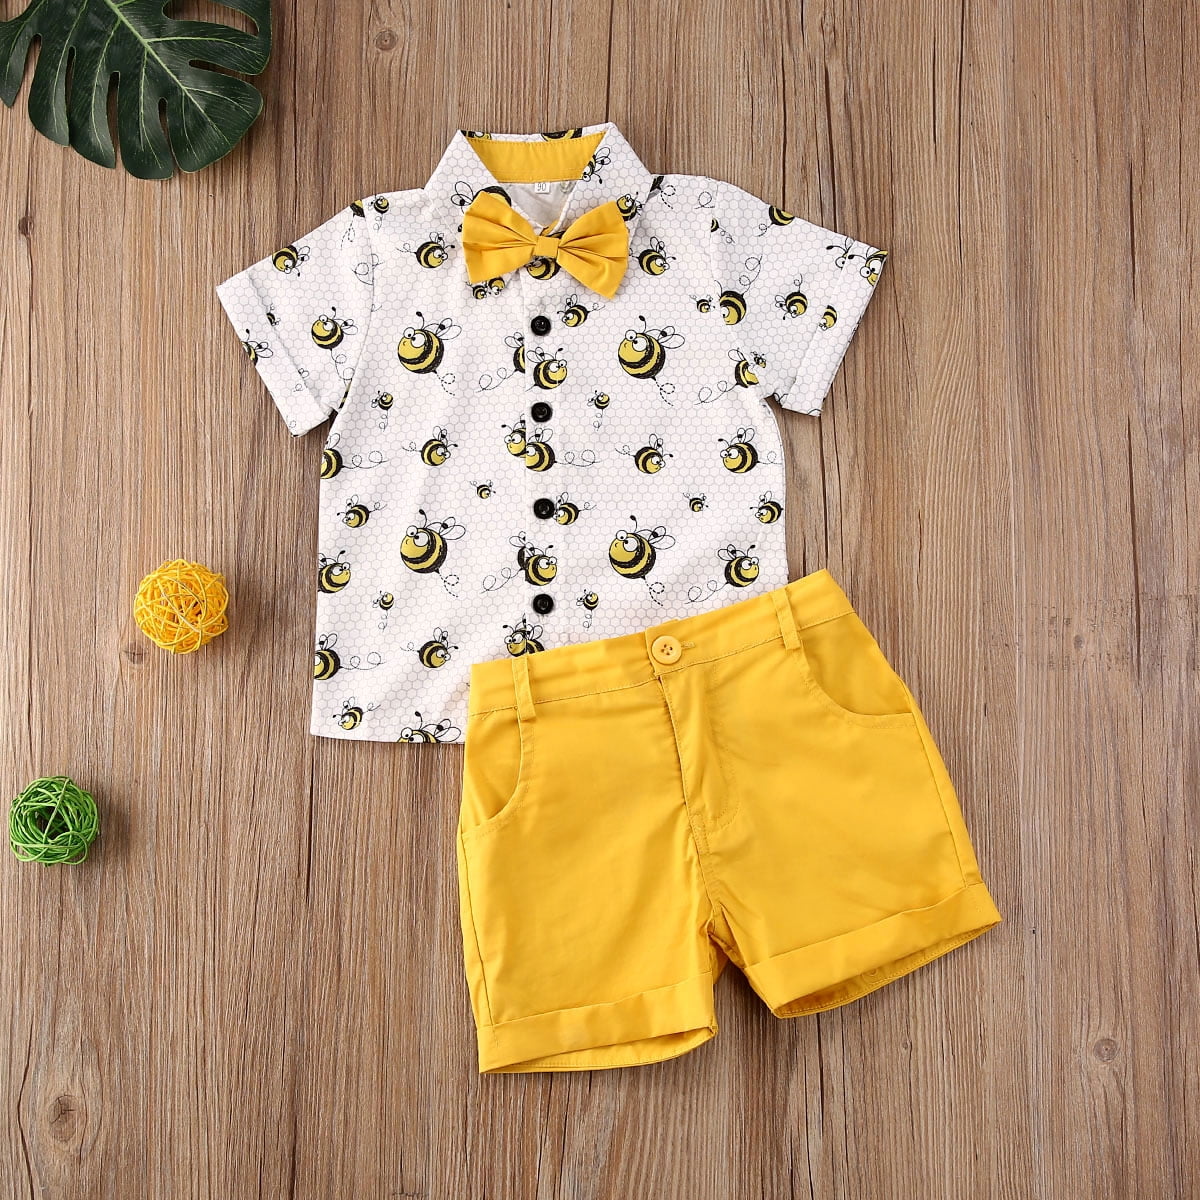 Kids Boys 2 Piece Short Sleeve Tshirt Shorts Set Outfits 1 to 5 Age Baby